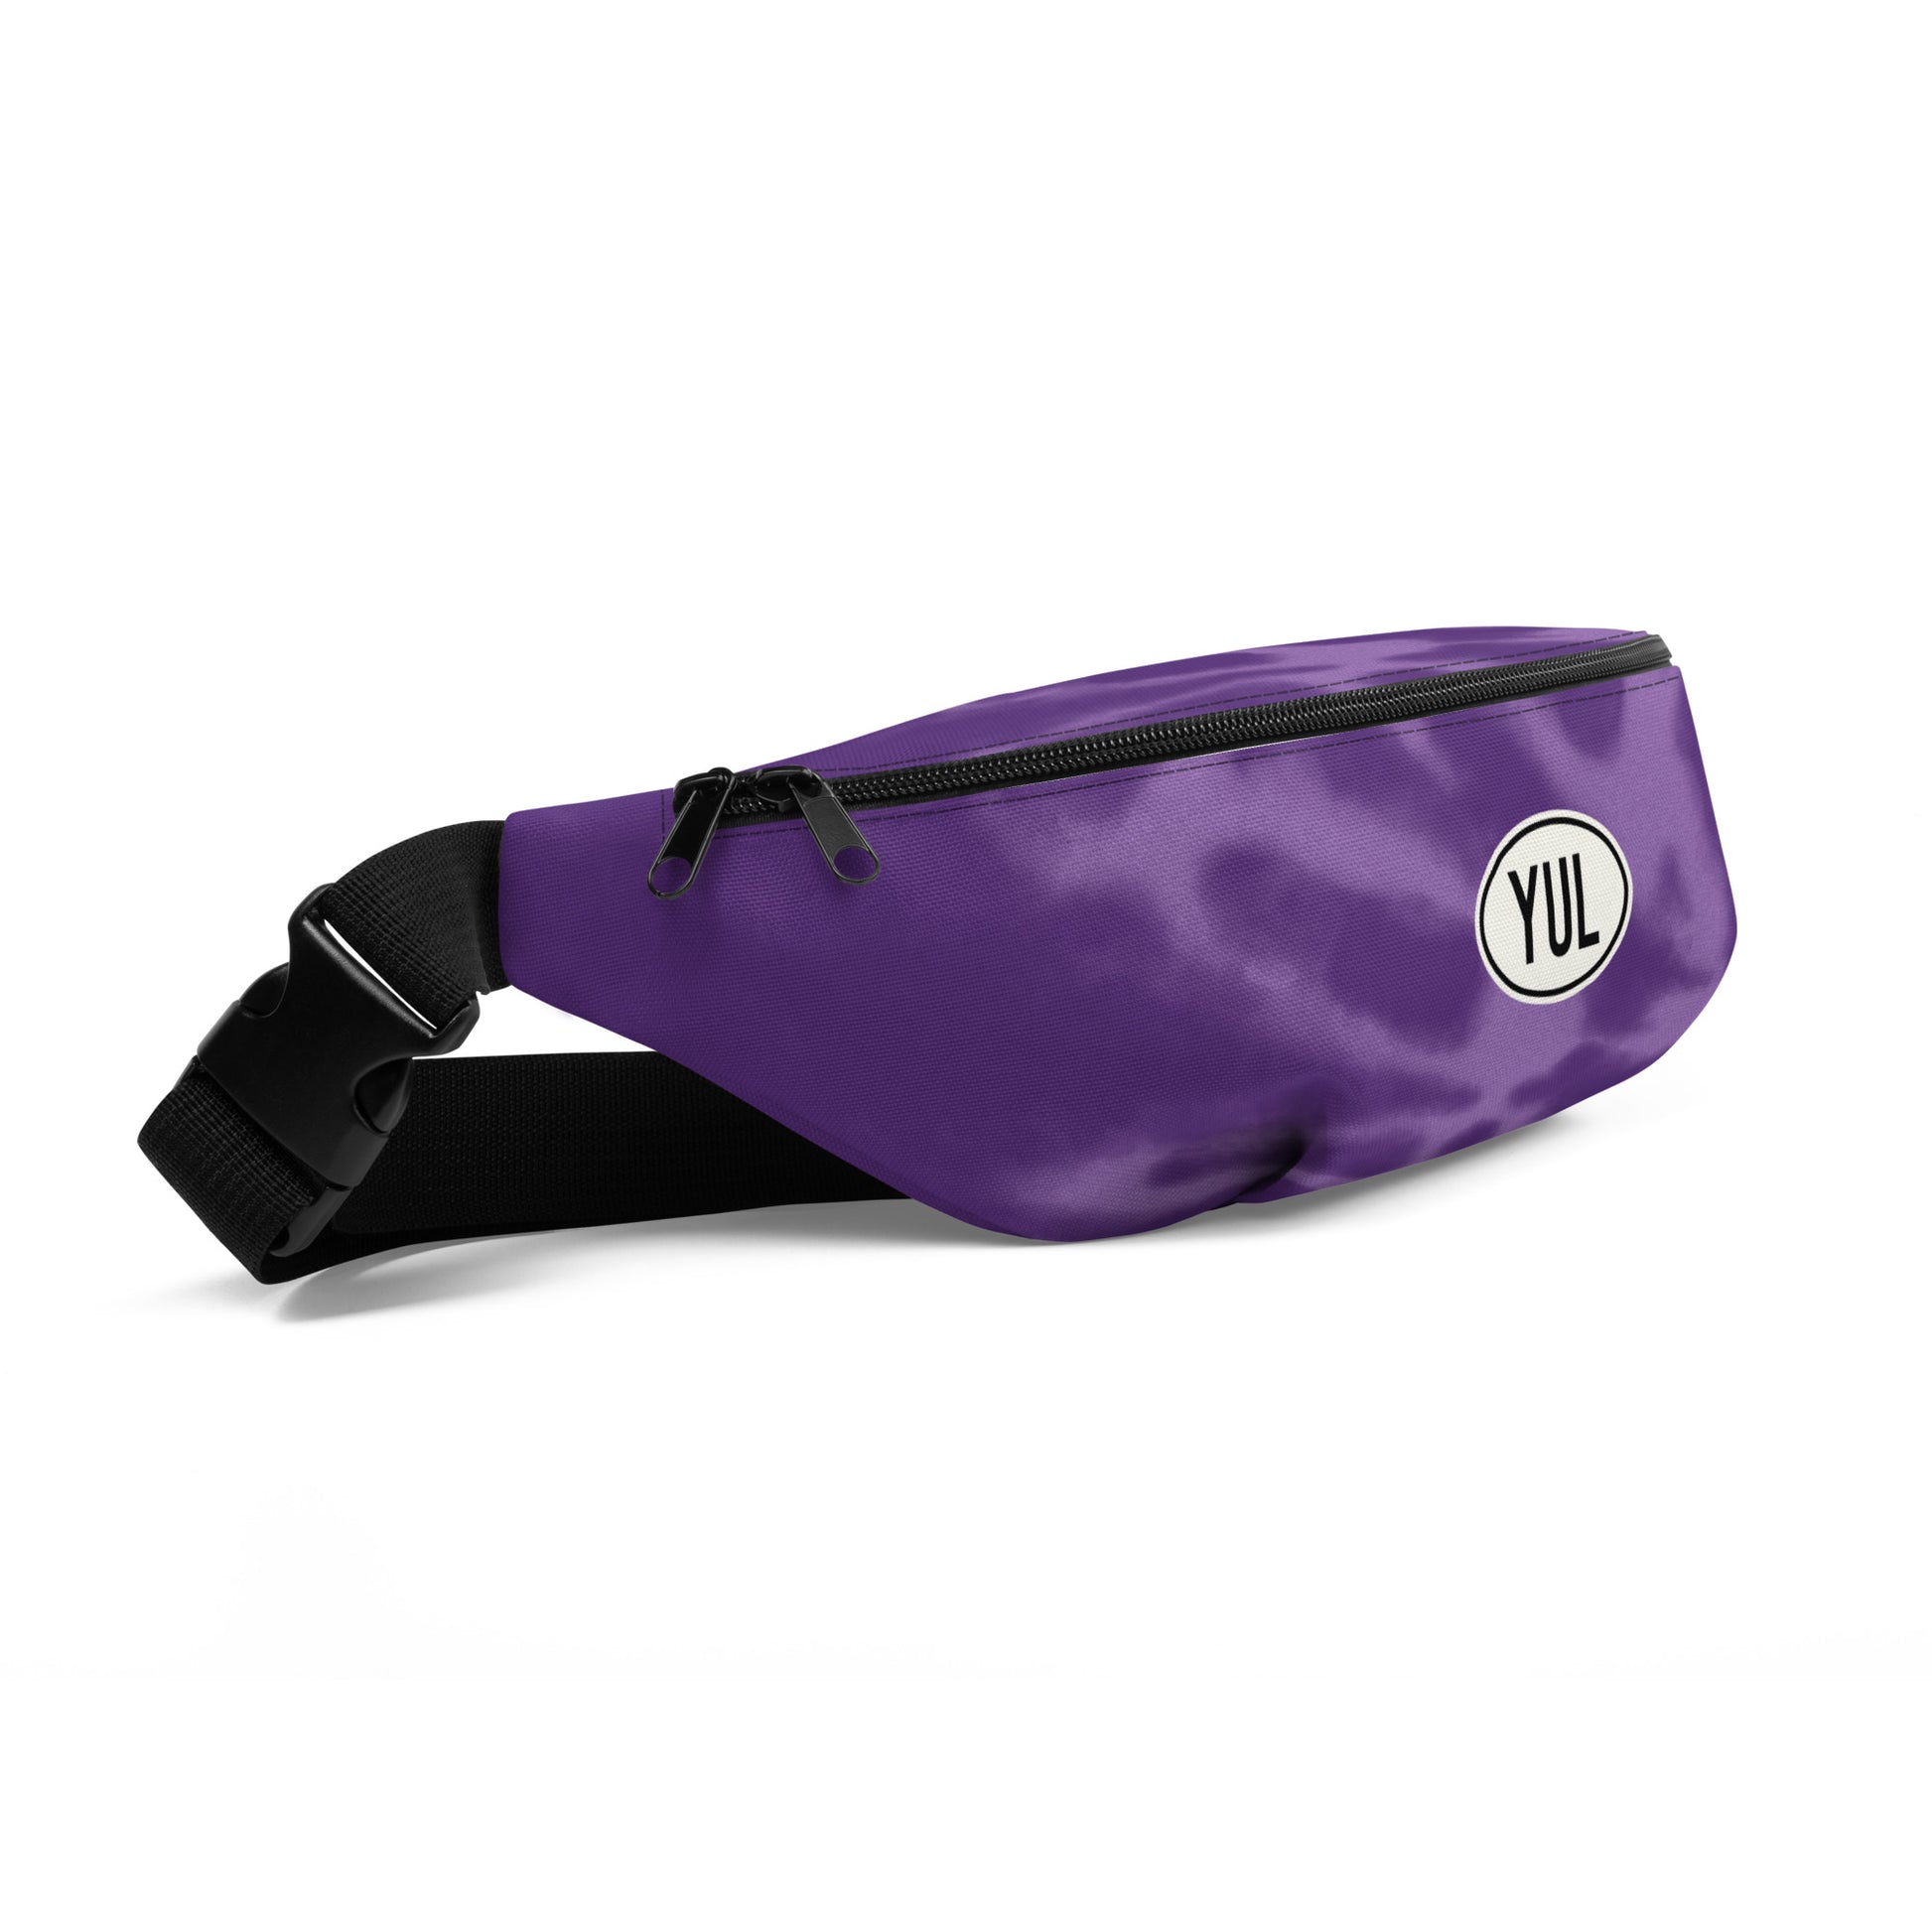 Travel Gift Fanny Pack - Purple Tie-Dye • YUL Montreal • YHM Designs - Image 07